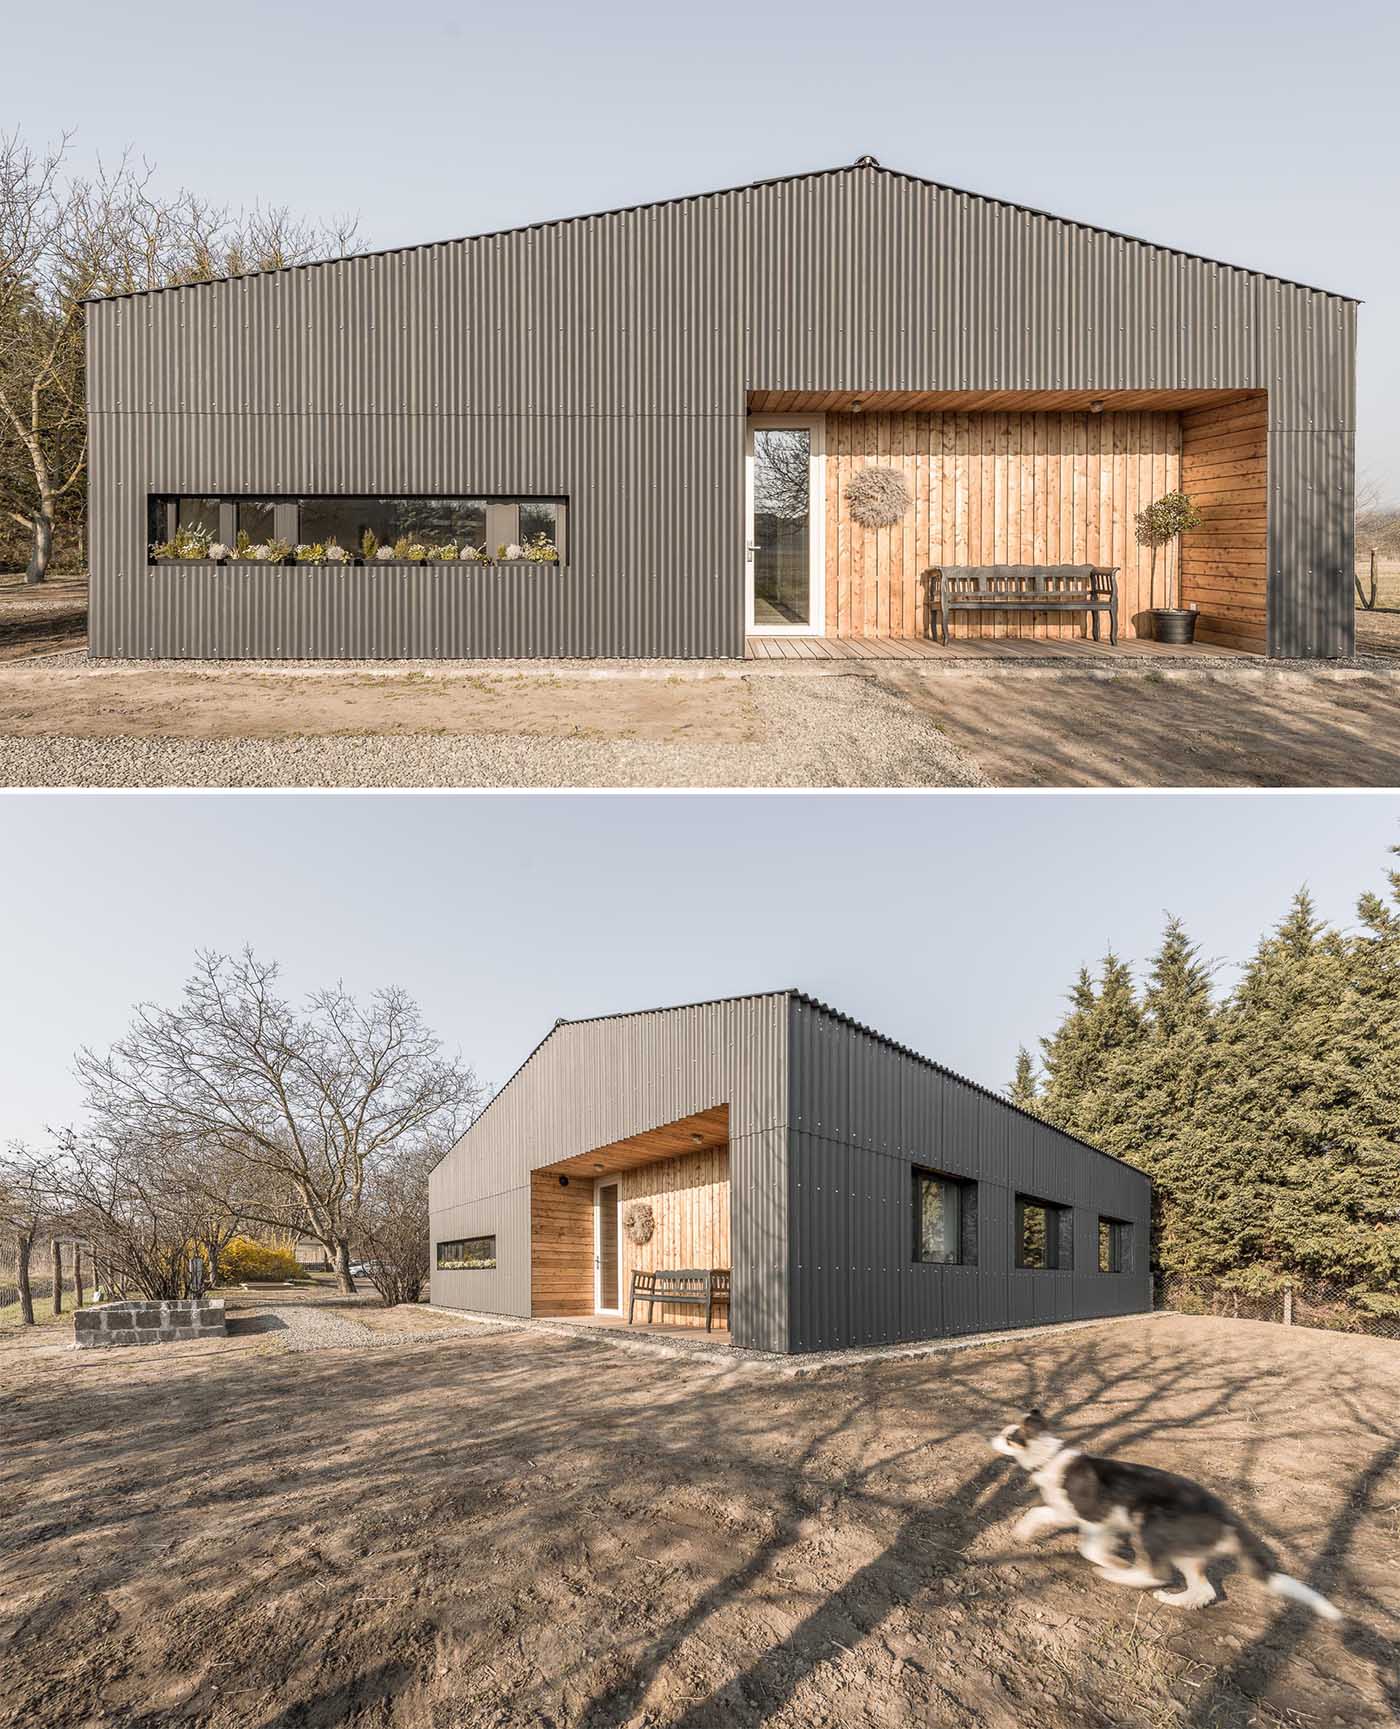 A modern house with corrugated fibre-cement slate siding and alcoves lined with larch wood siding.